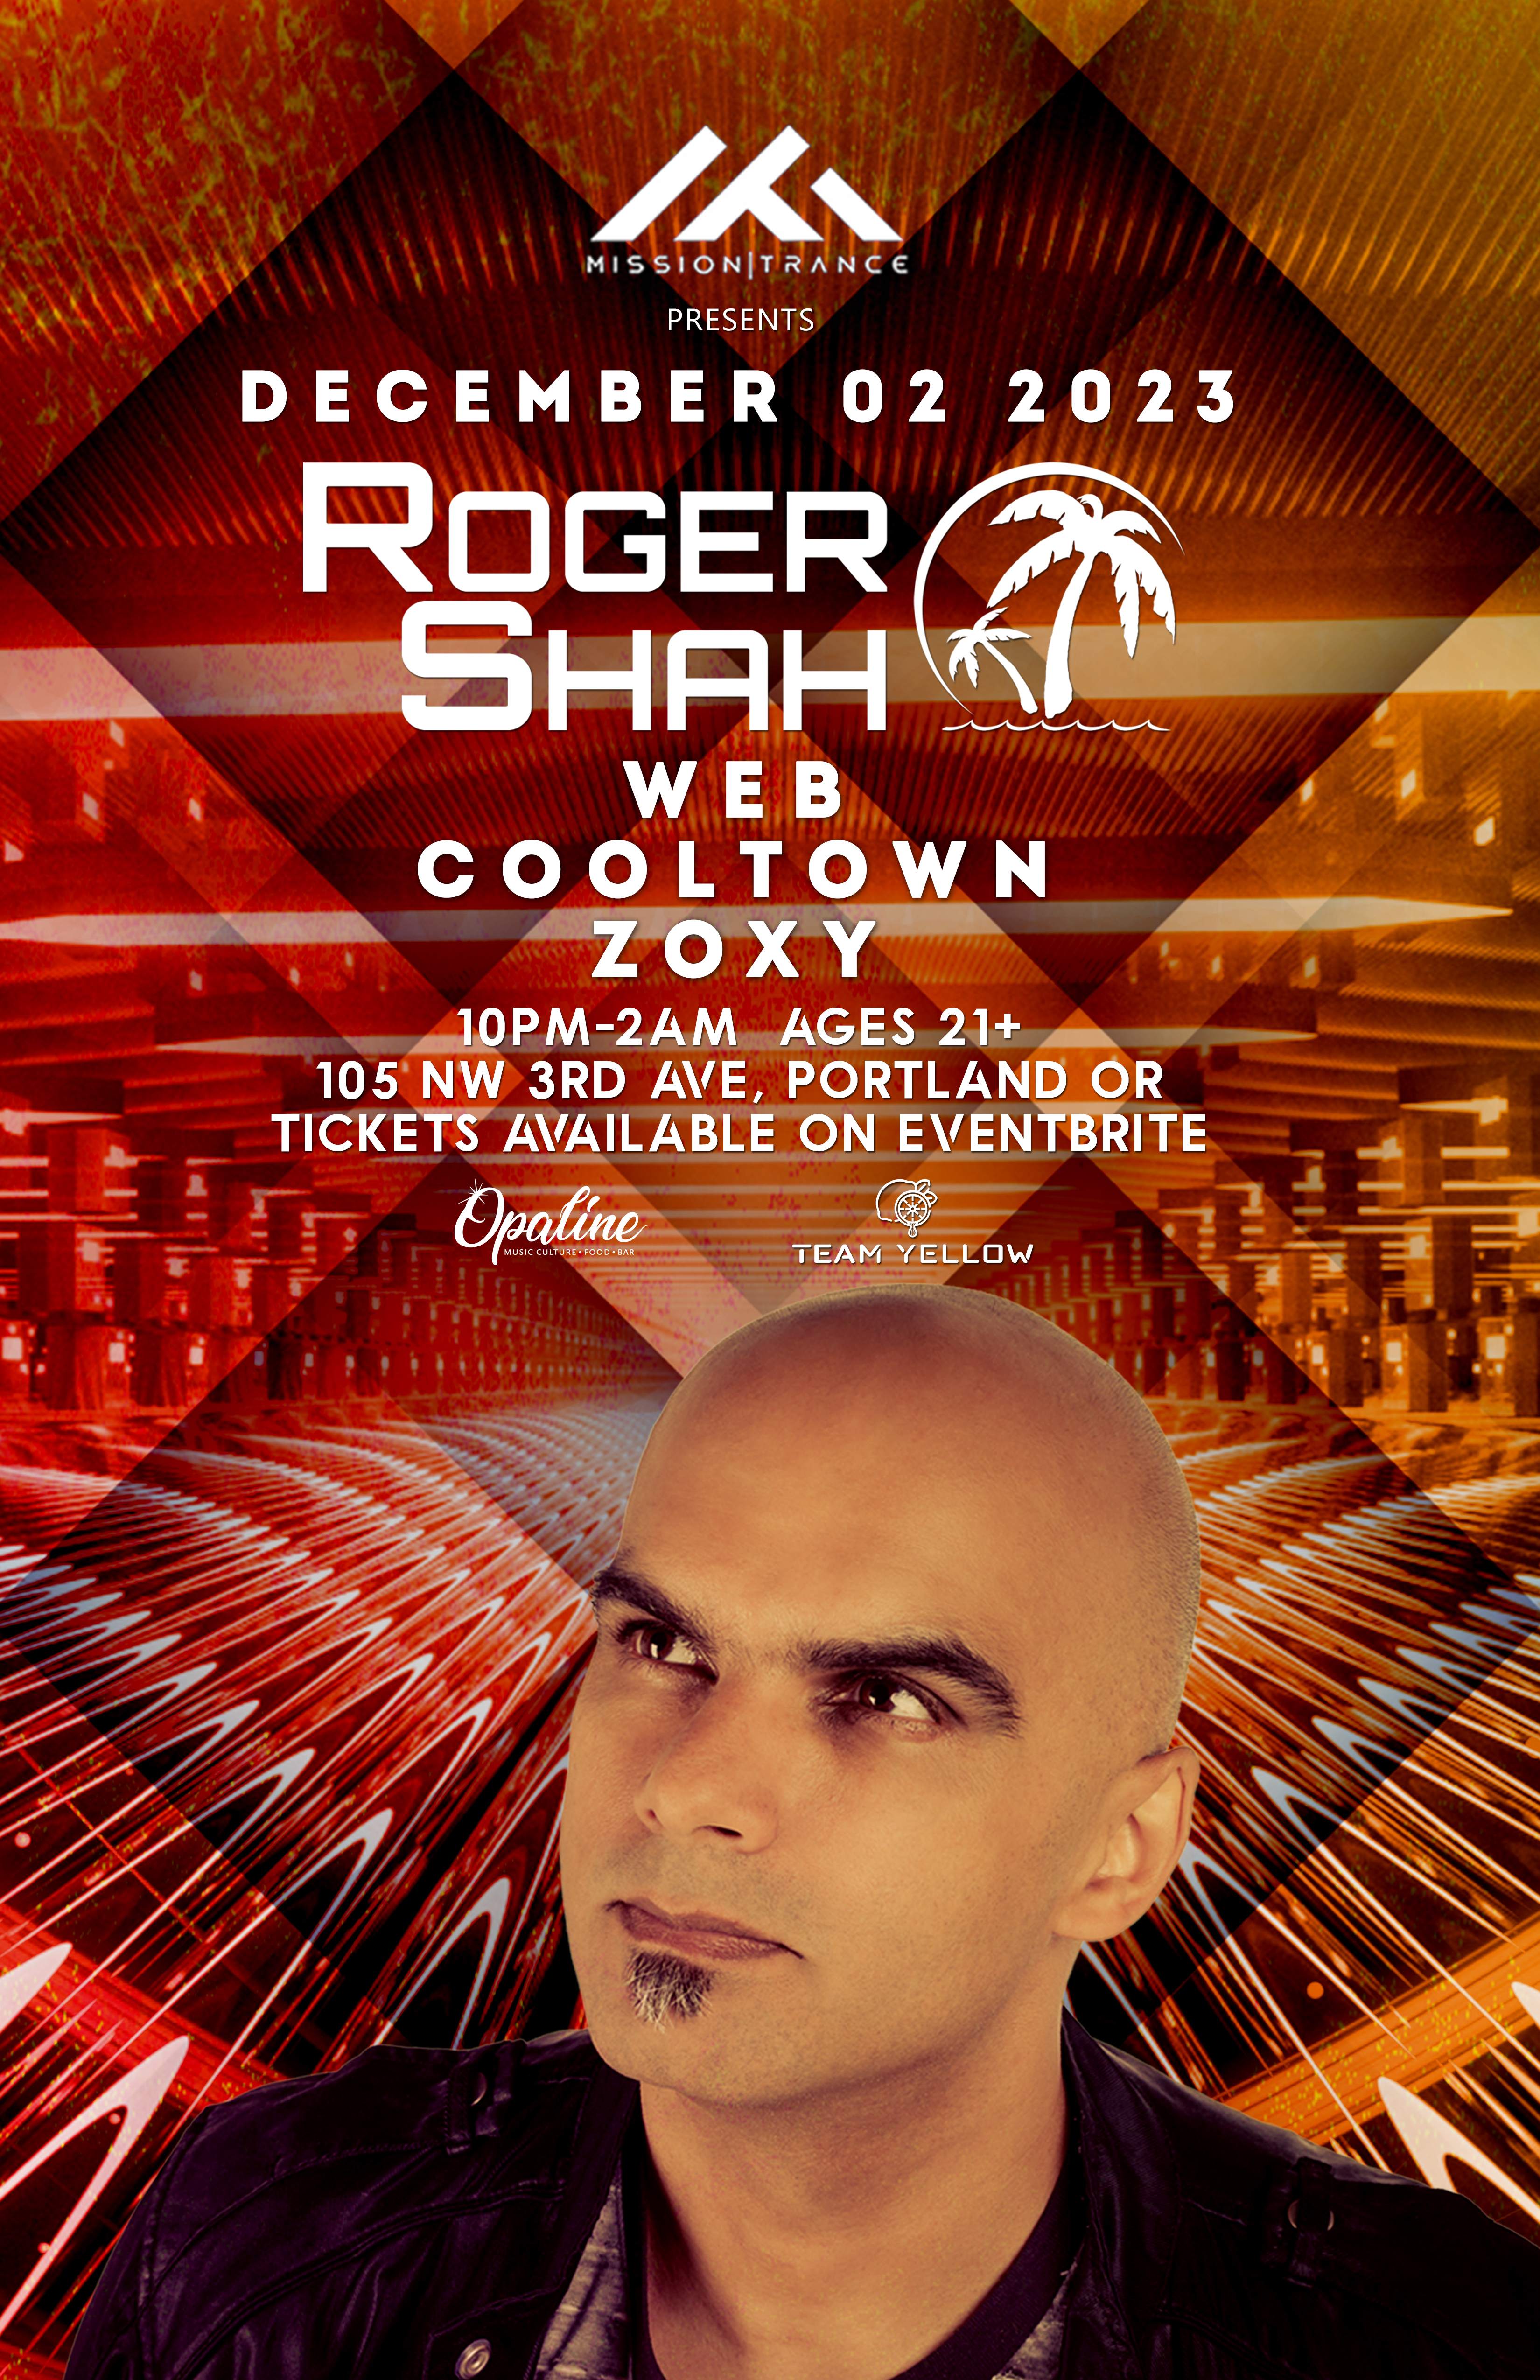 Mission Trance presents: Roger Shah (Feat. Cooltown) - フライヤー表